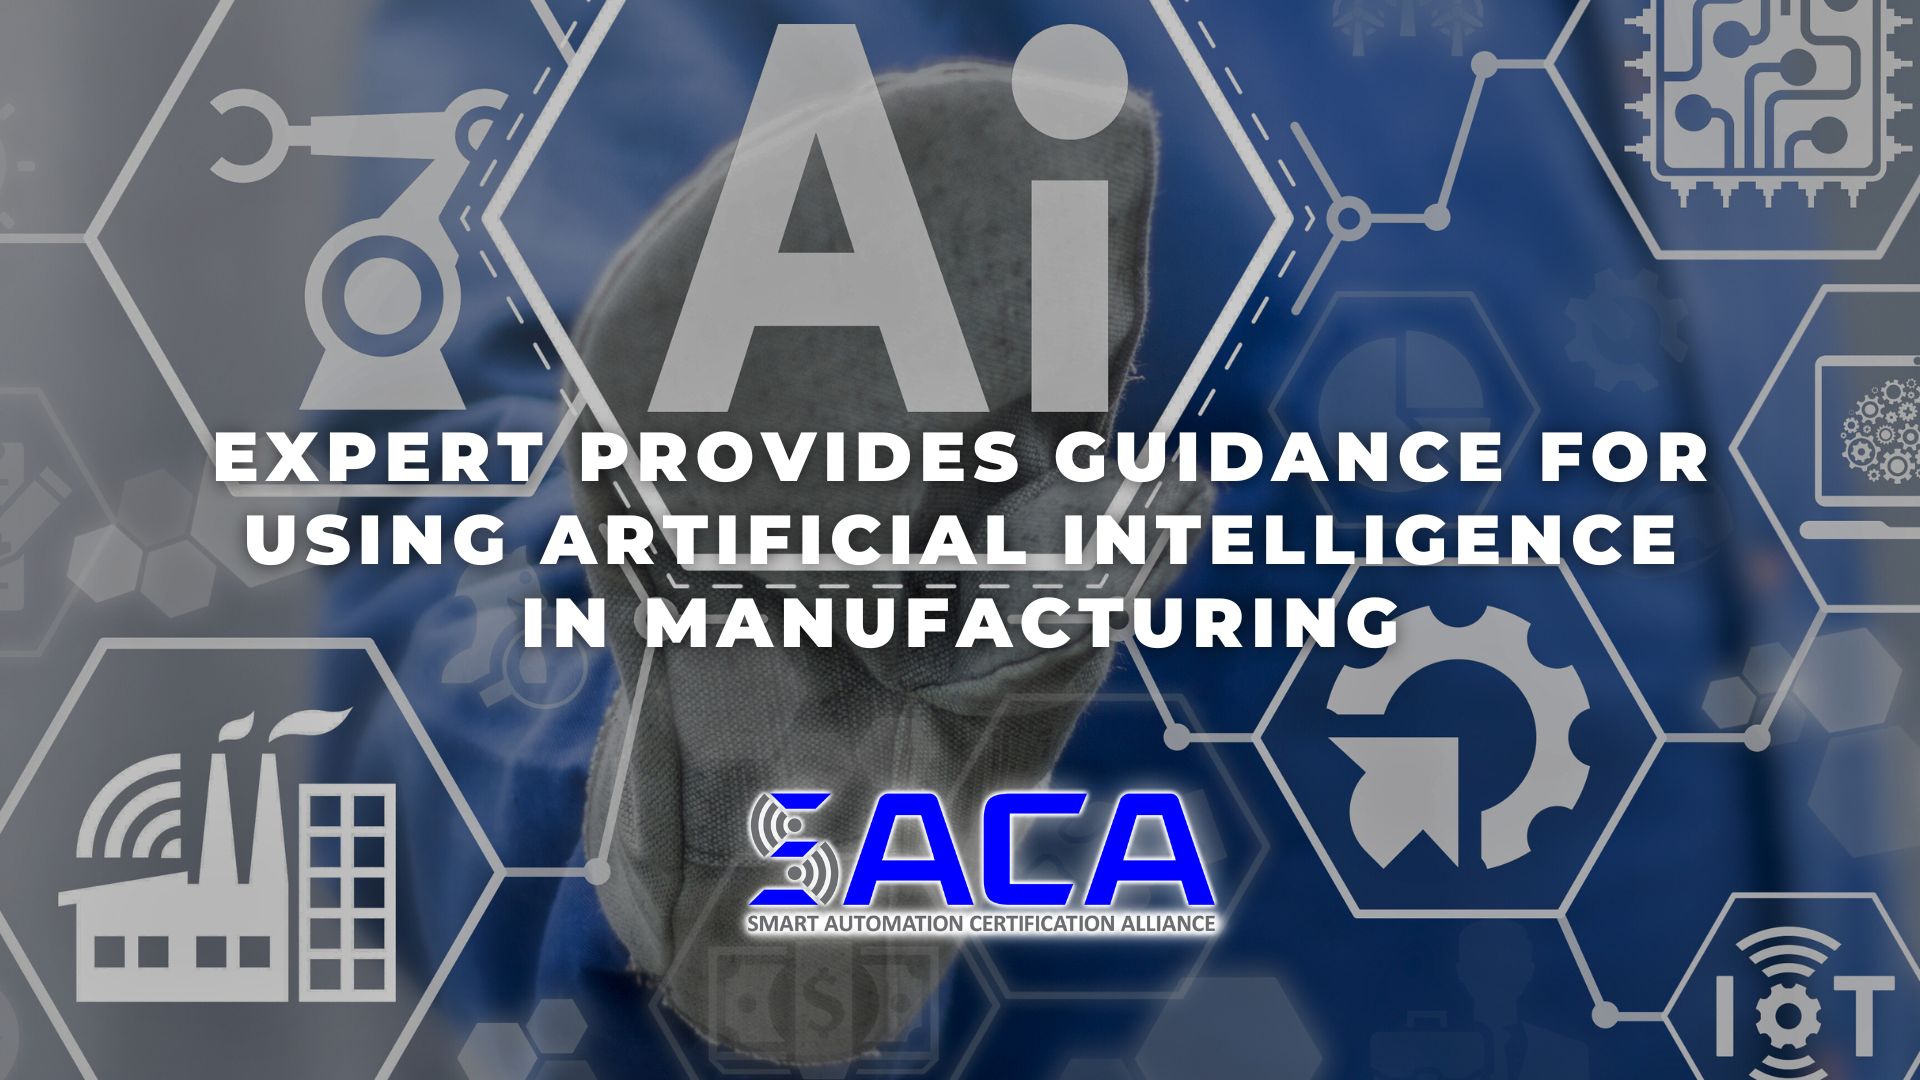 SACA - Expert Provides Guidance for Using Artificial Intelligence in Manufacturing